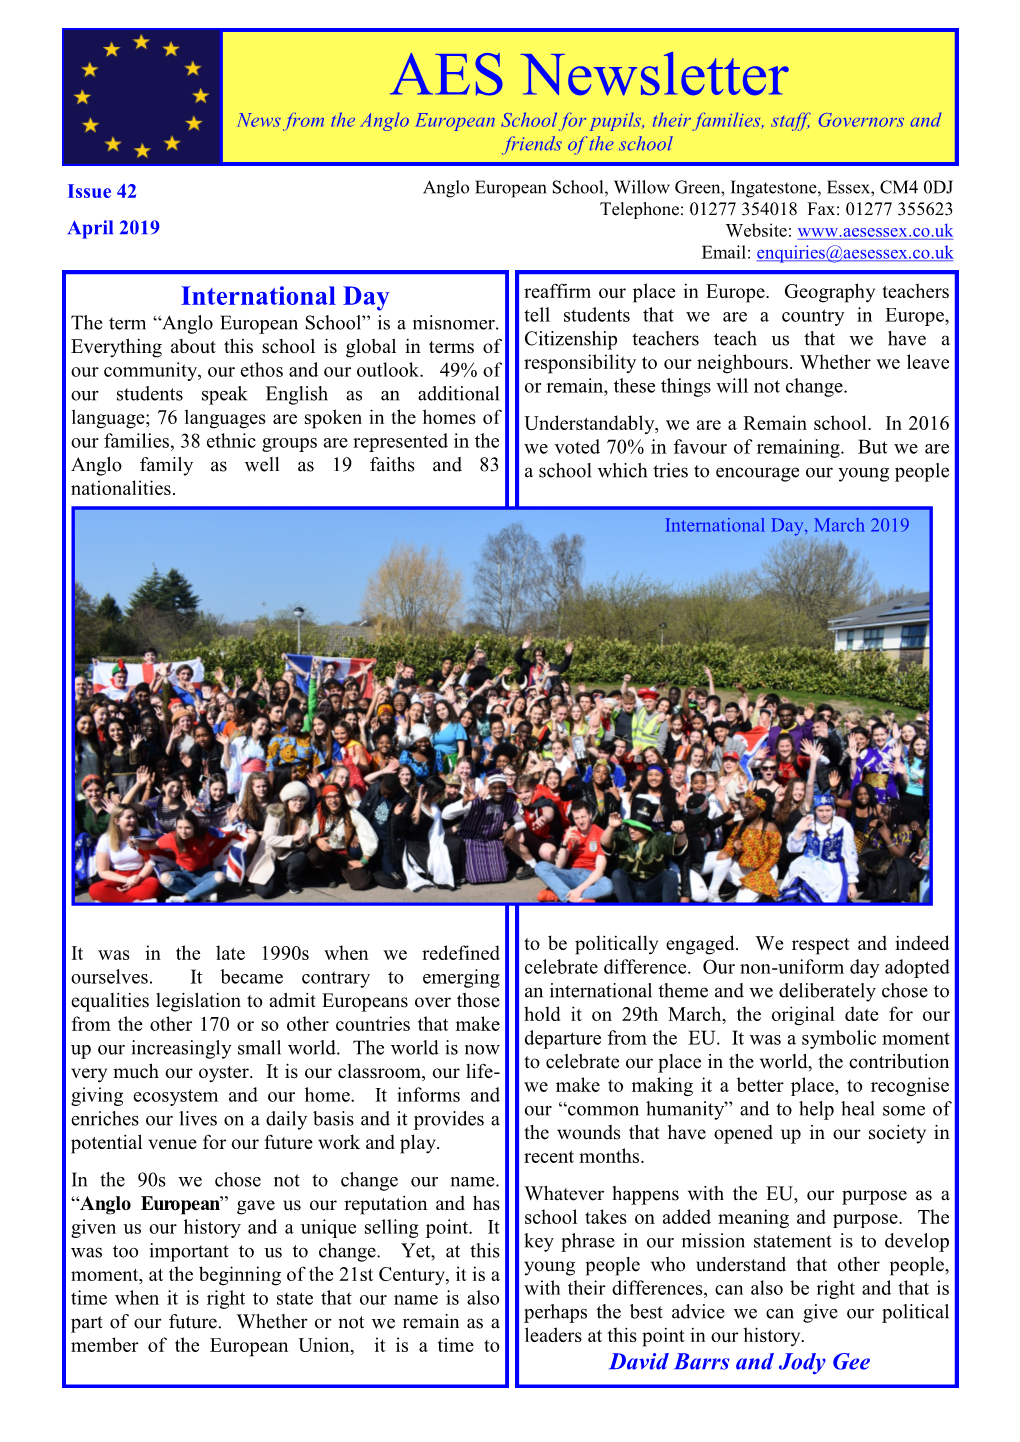 AES Newsletter News from the Anglo European School for Pupils, Their Families, Staff, Governors and Friends of the School